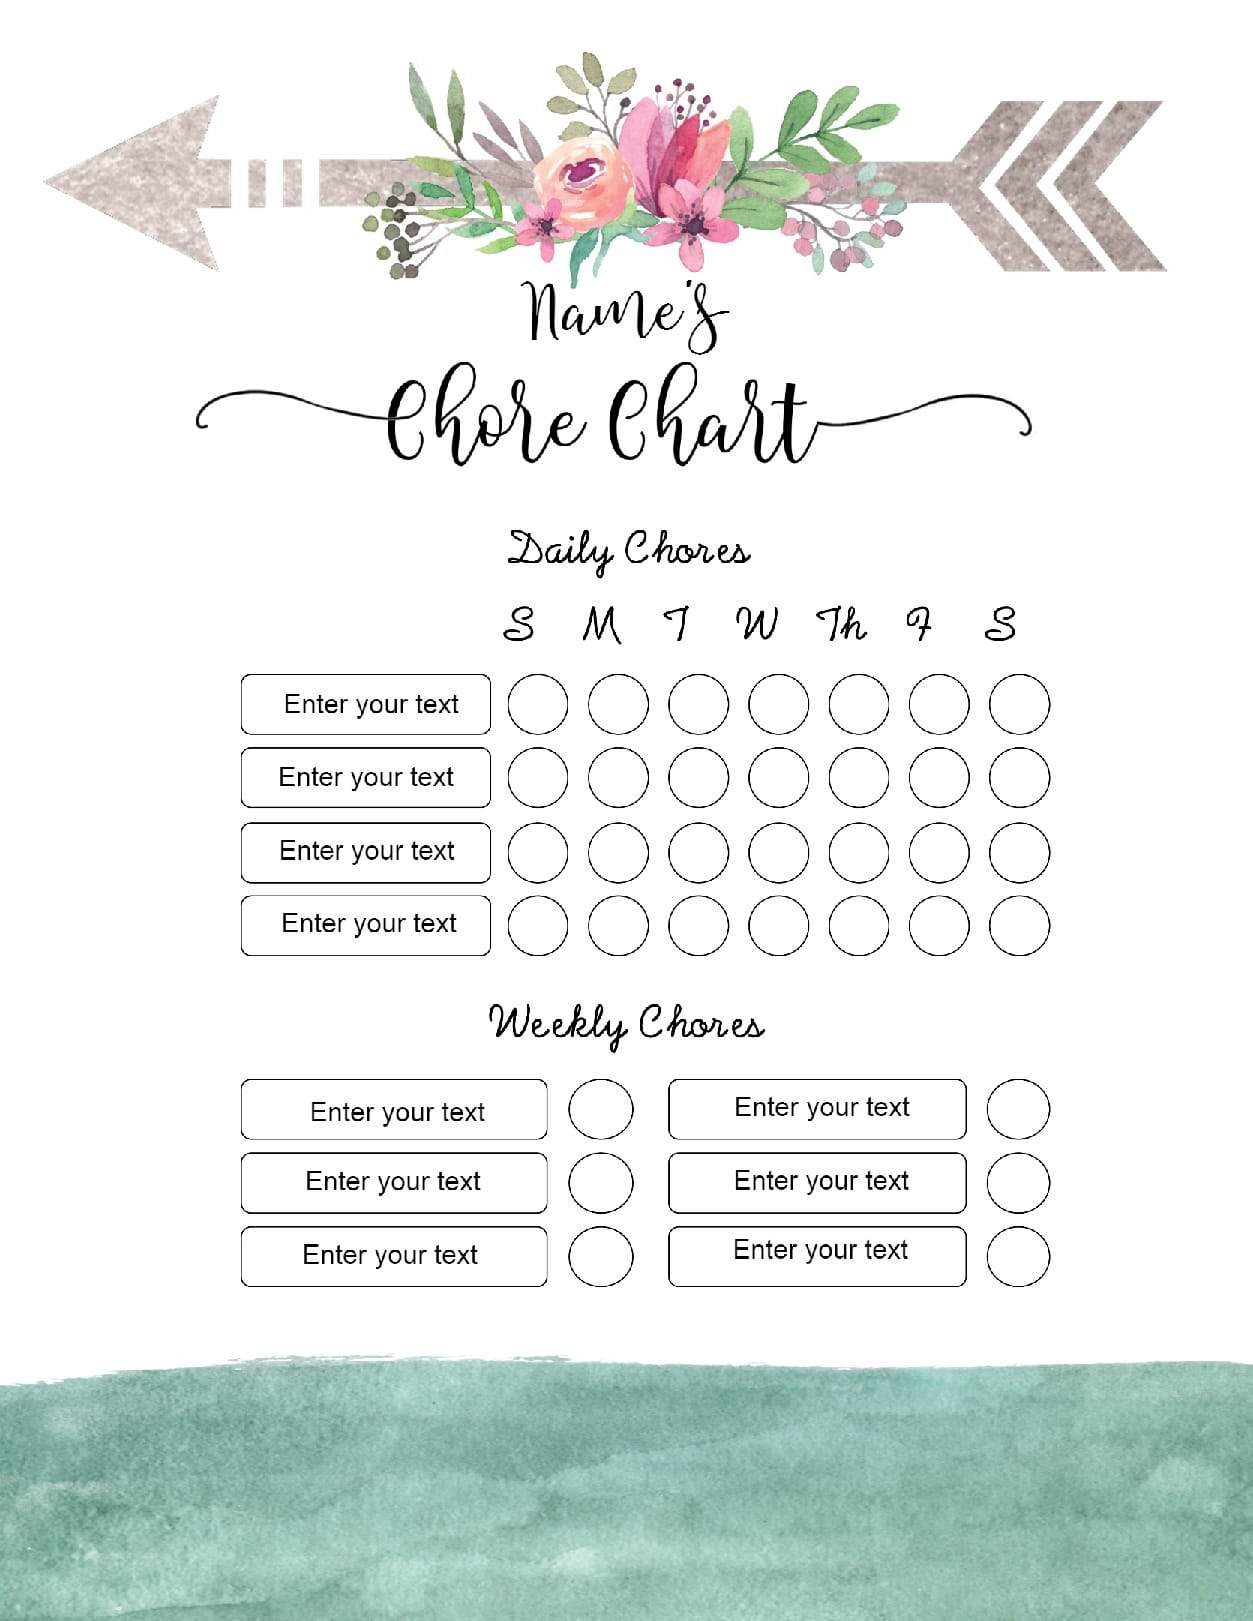 Create Your Own Chore Chart Online